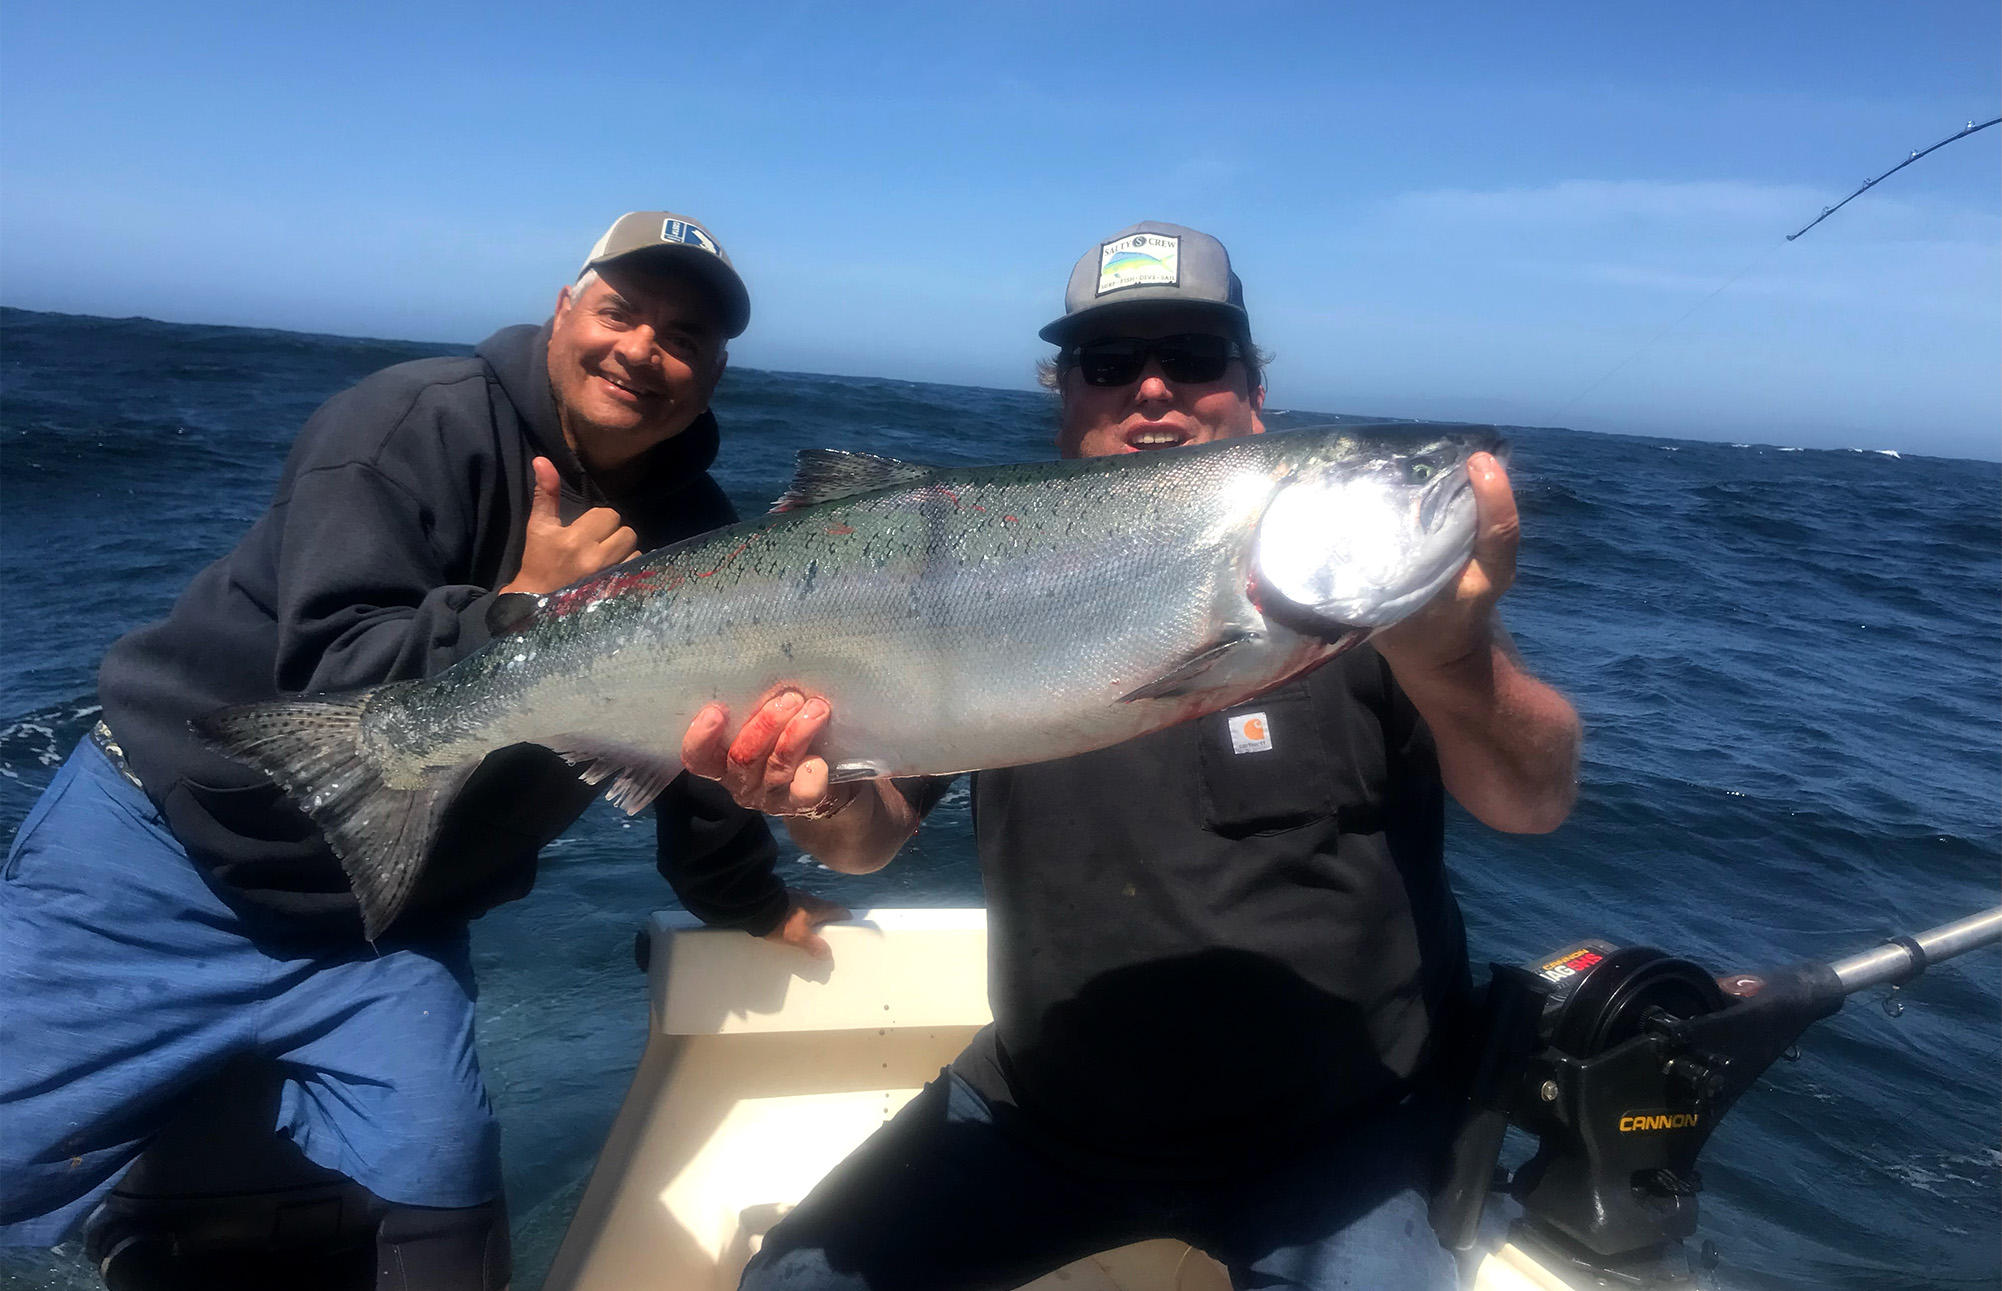 Arujo and Weilbacher with king salmon